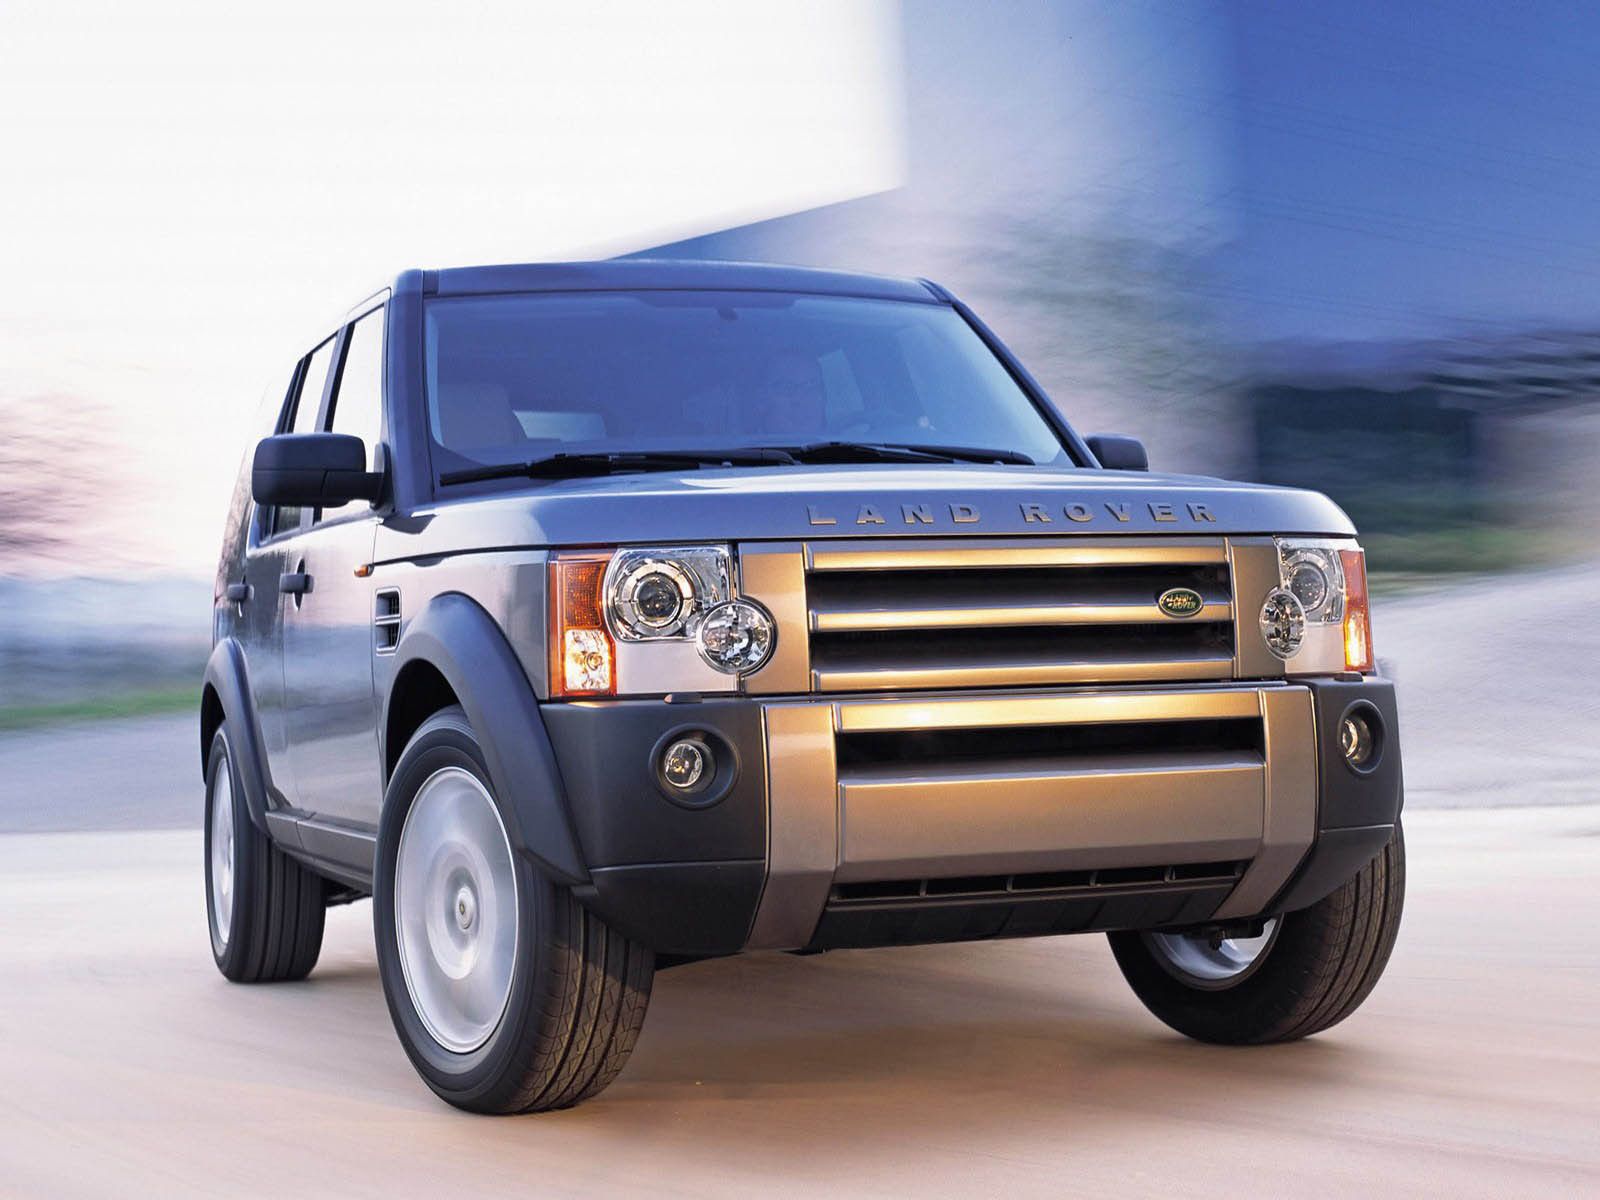 2005 Landrover Discovery3